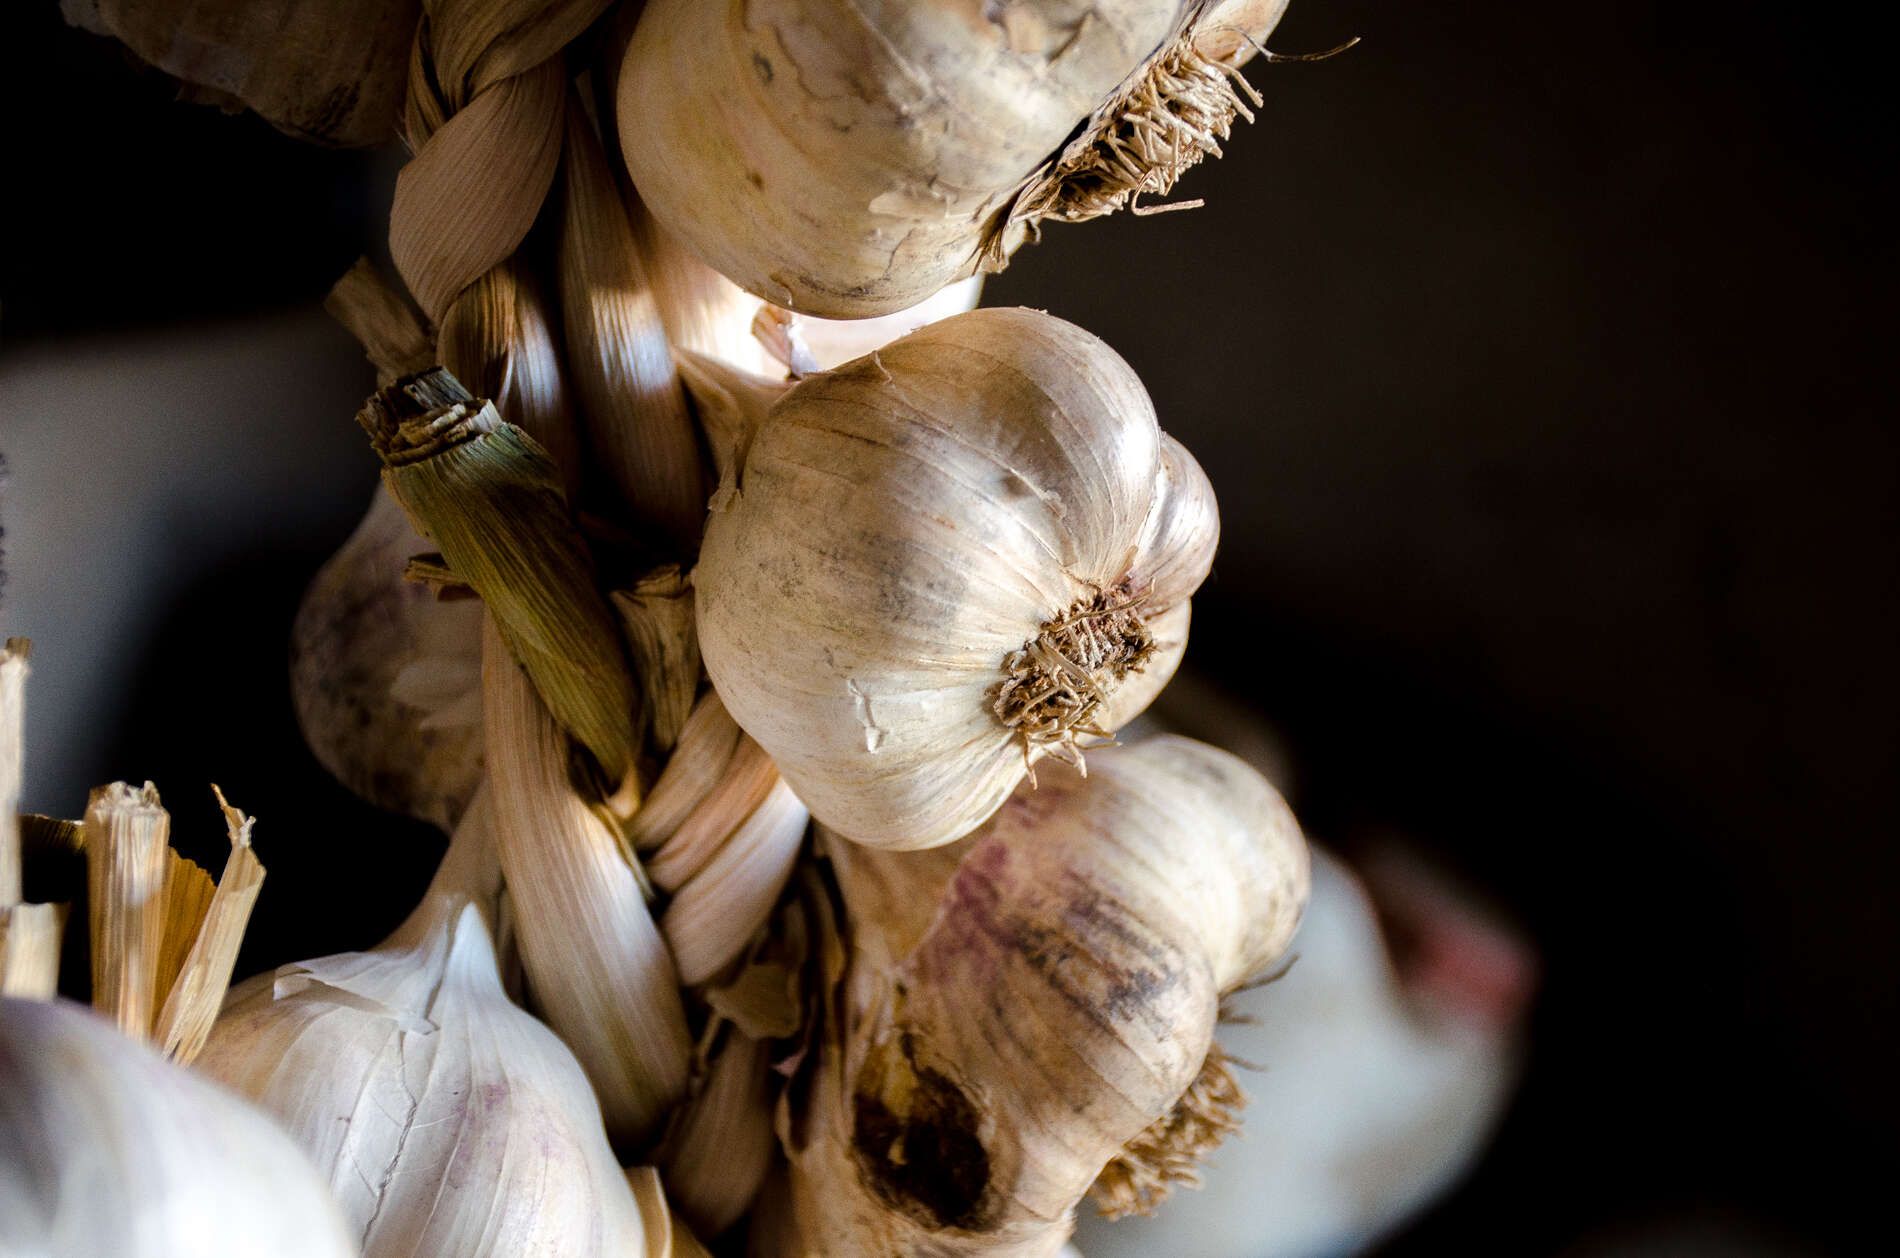 Image of cultivated garlic